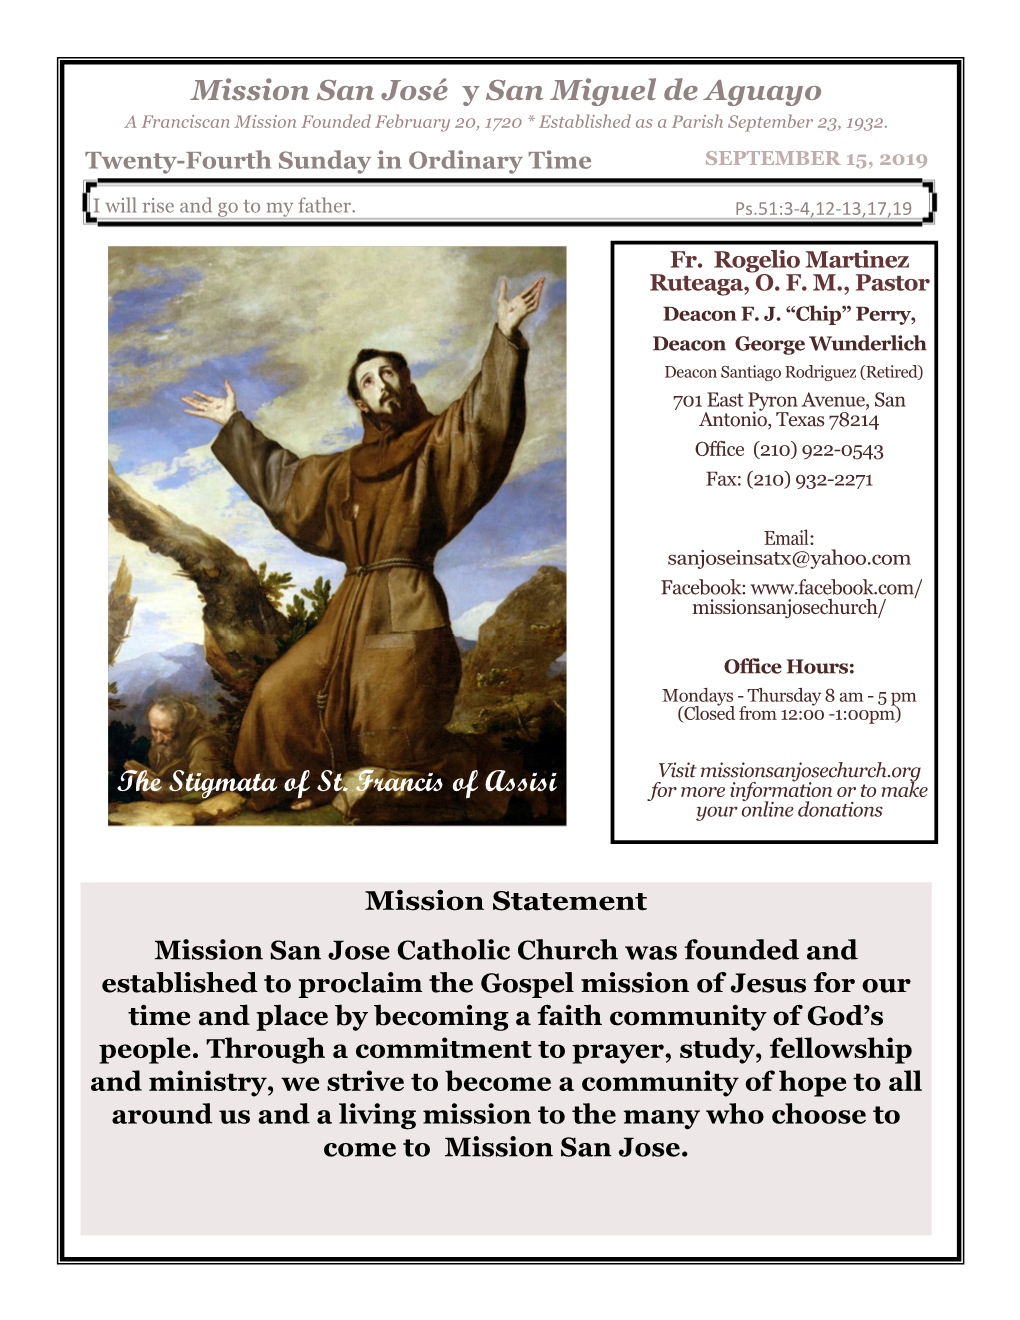 The Stigmata of St. Francis of Assisi for More Information Or to Make Your Online Donations